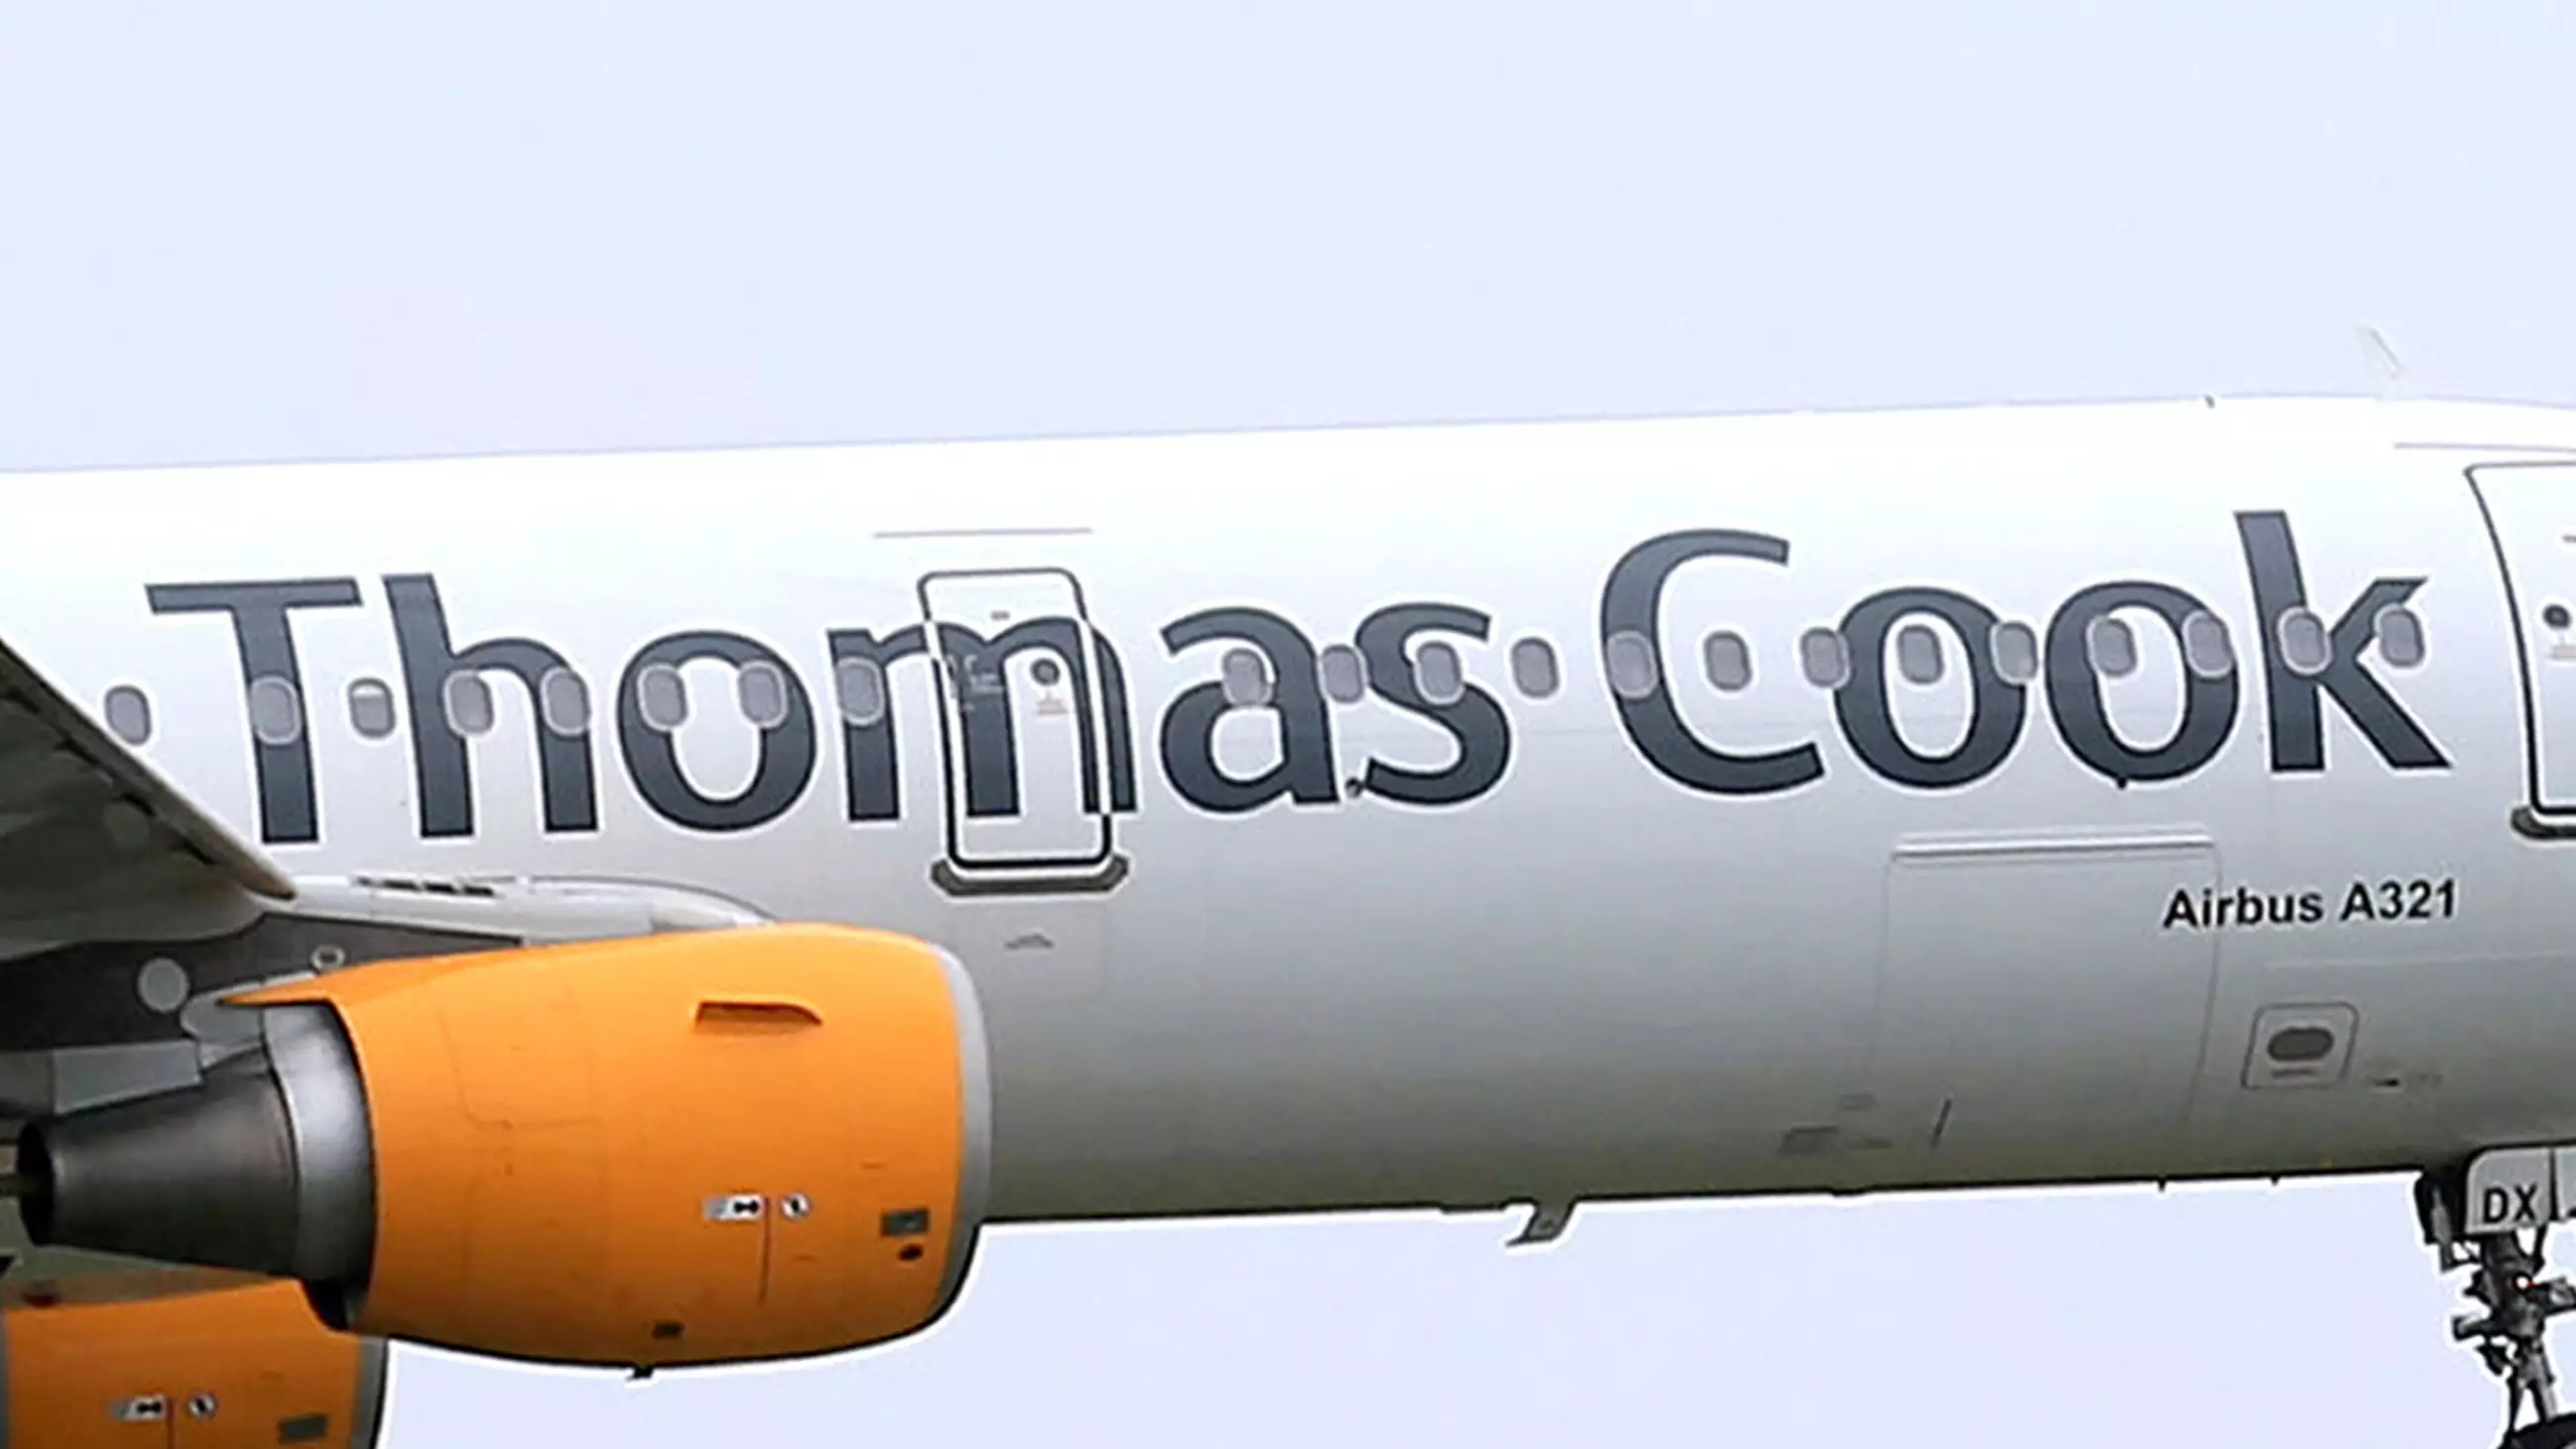 If Thomas Cook Goes Bust, Will I Get My Money Back?